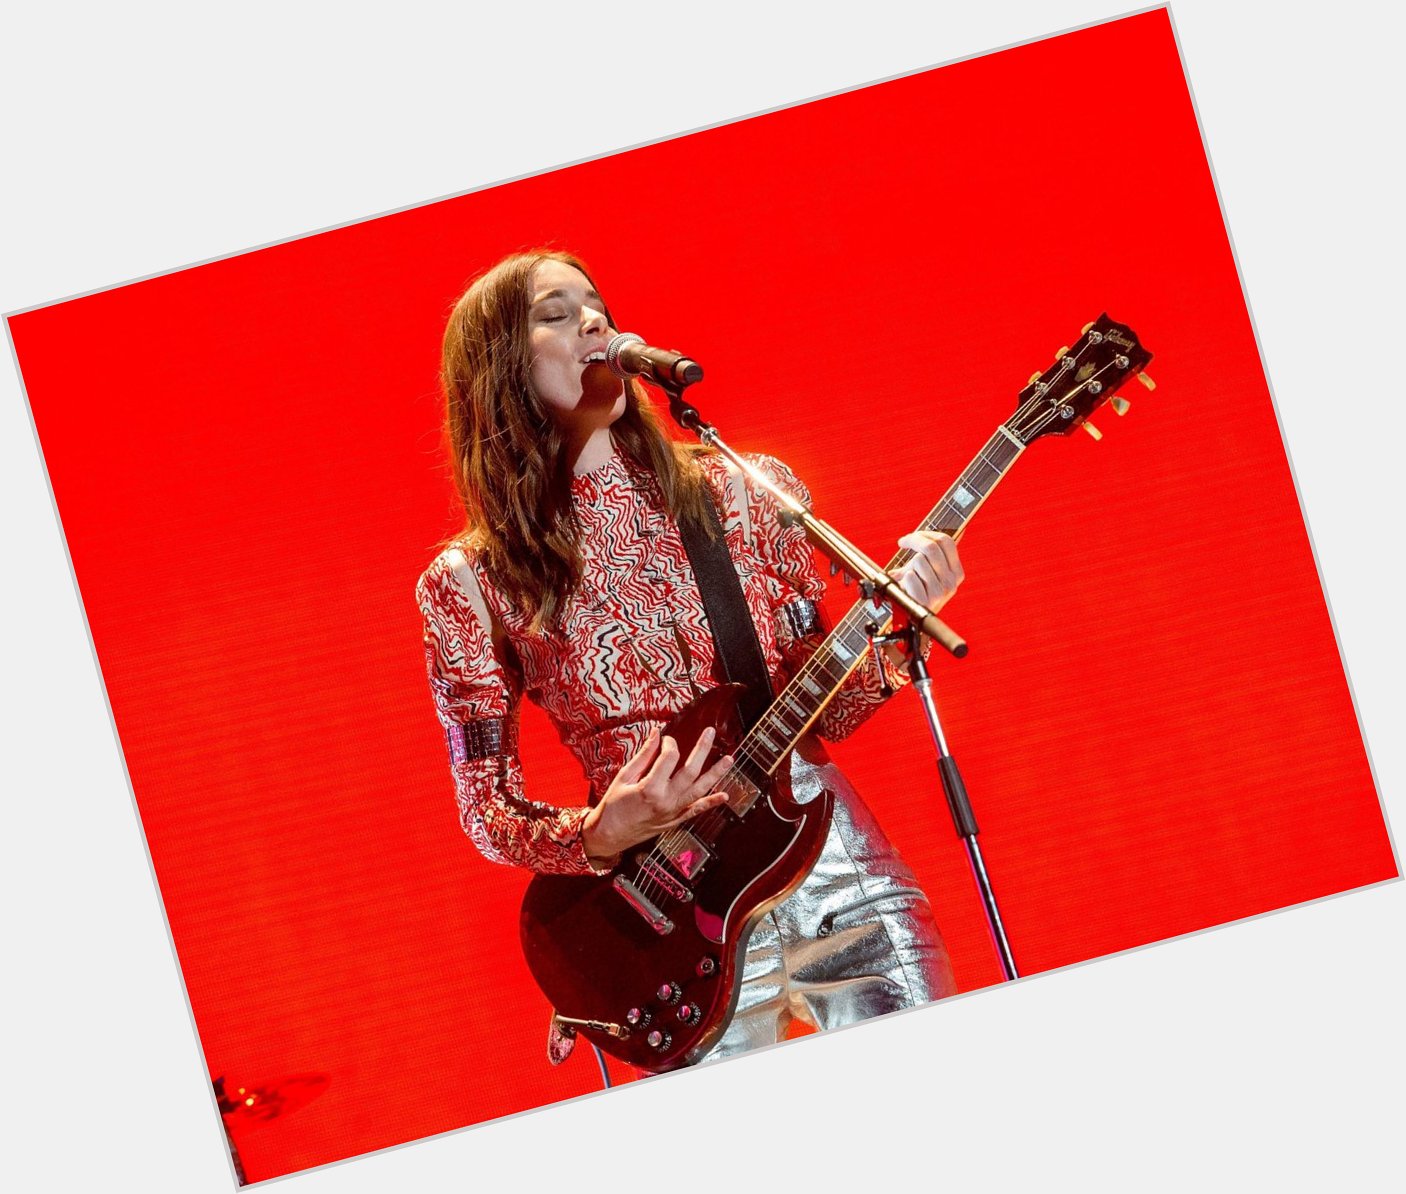 Happy birthday to my fav angelic shredding queen and absolute love of my life, Danielle Haim    